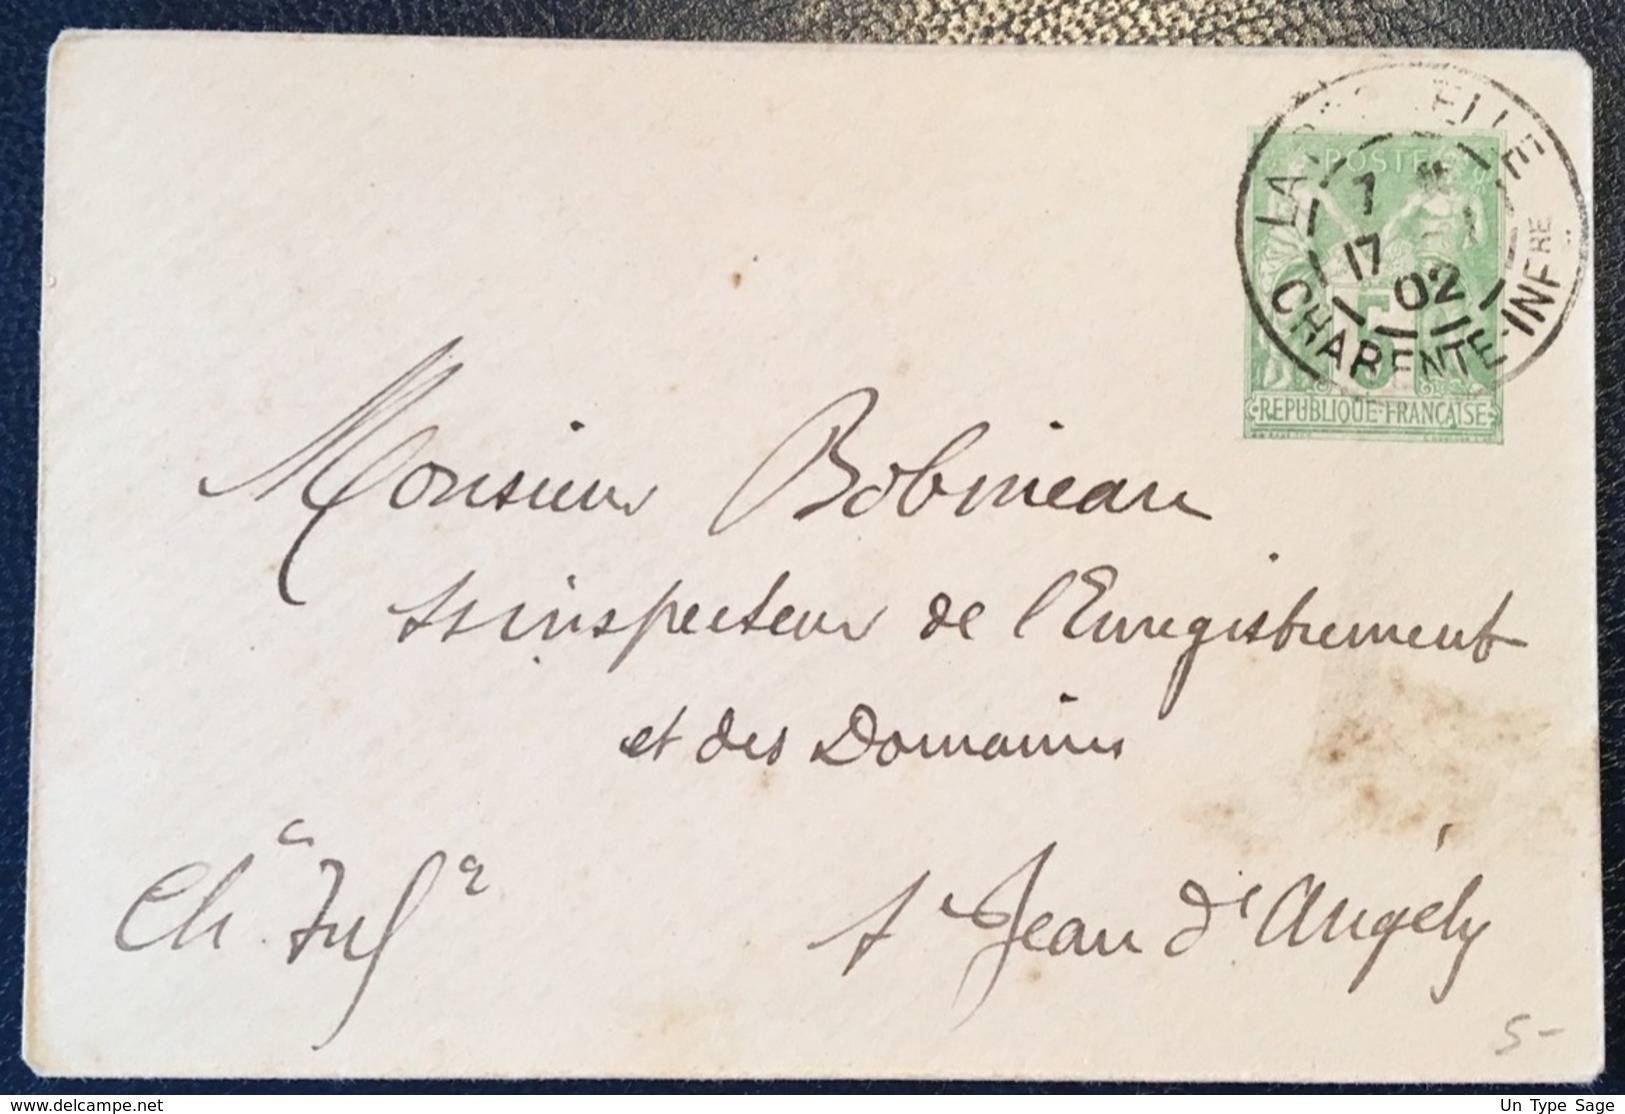 France - Entier Au Type Sage - OBL La Rochelle 1902 - (B1084) - Standard Covers & Stamped On Demand (before 1995)